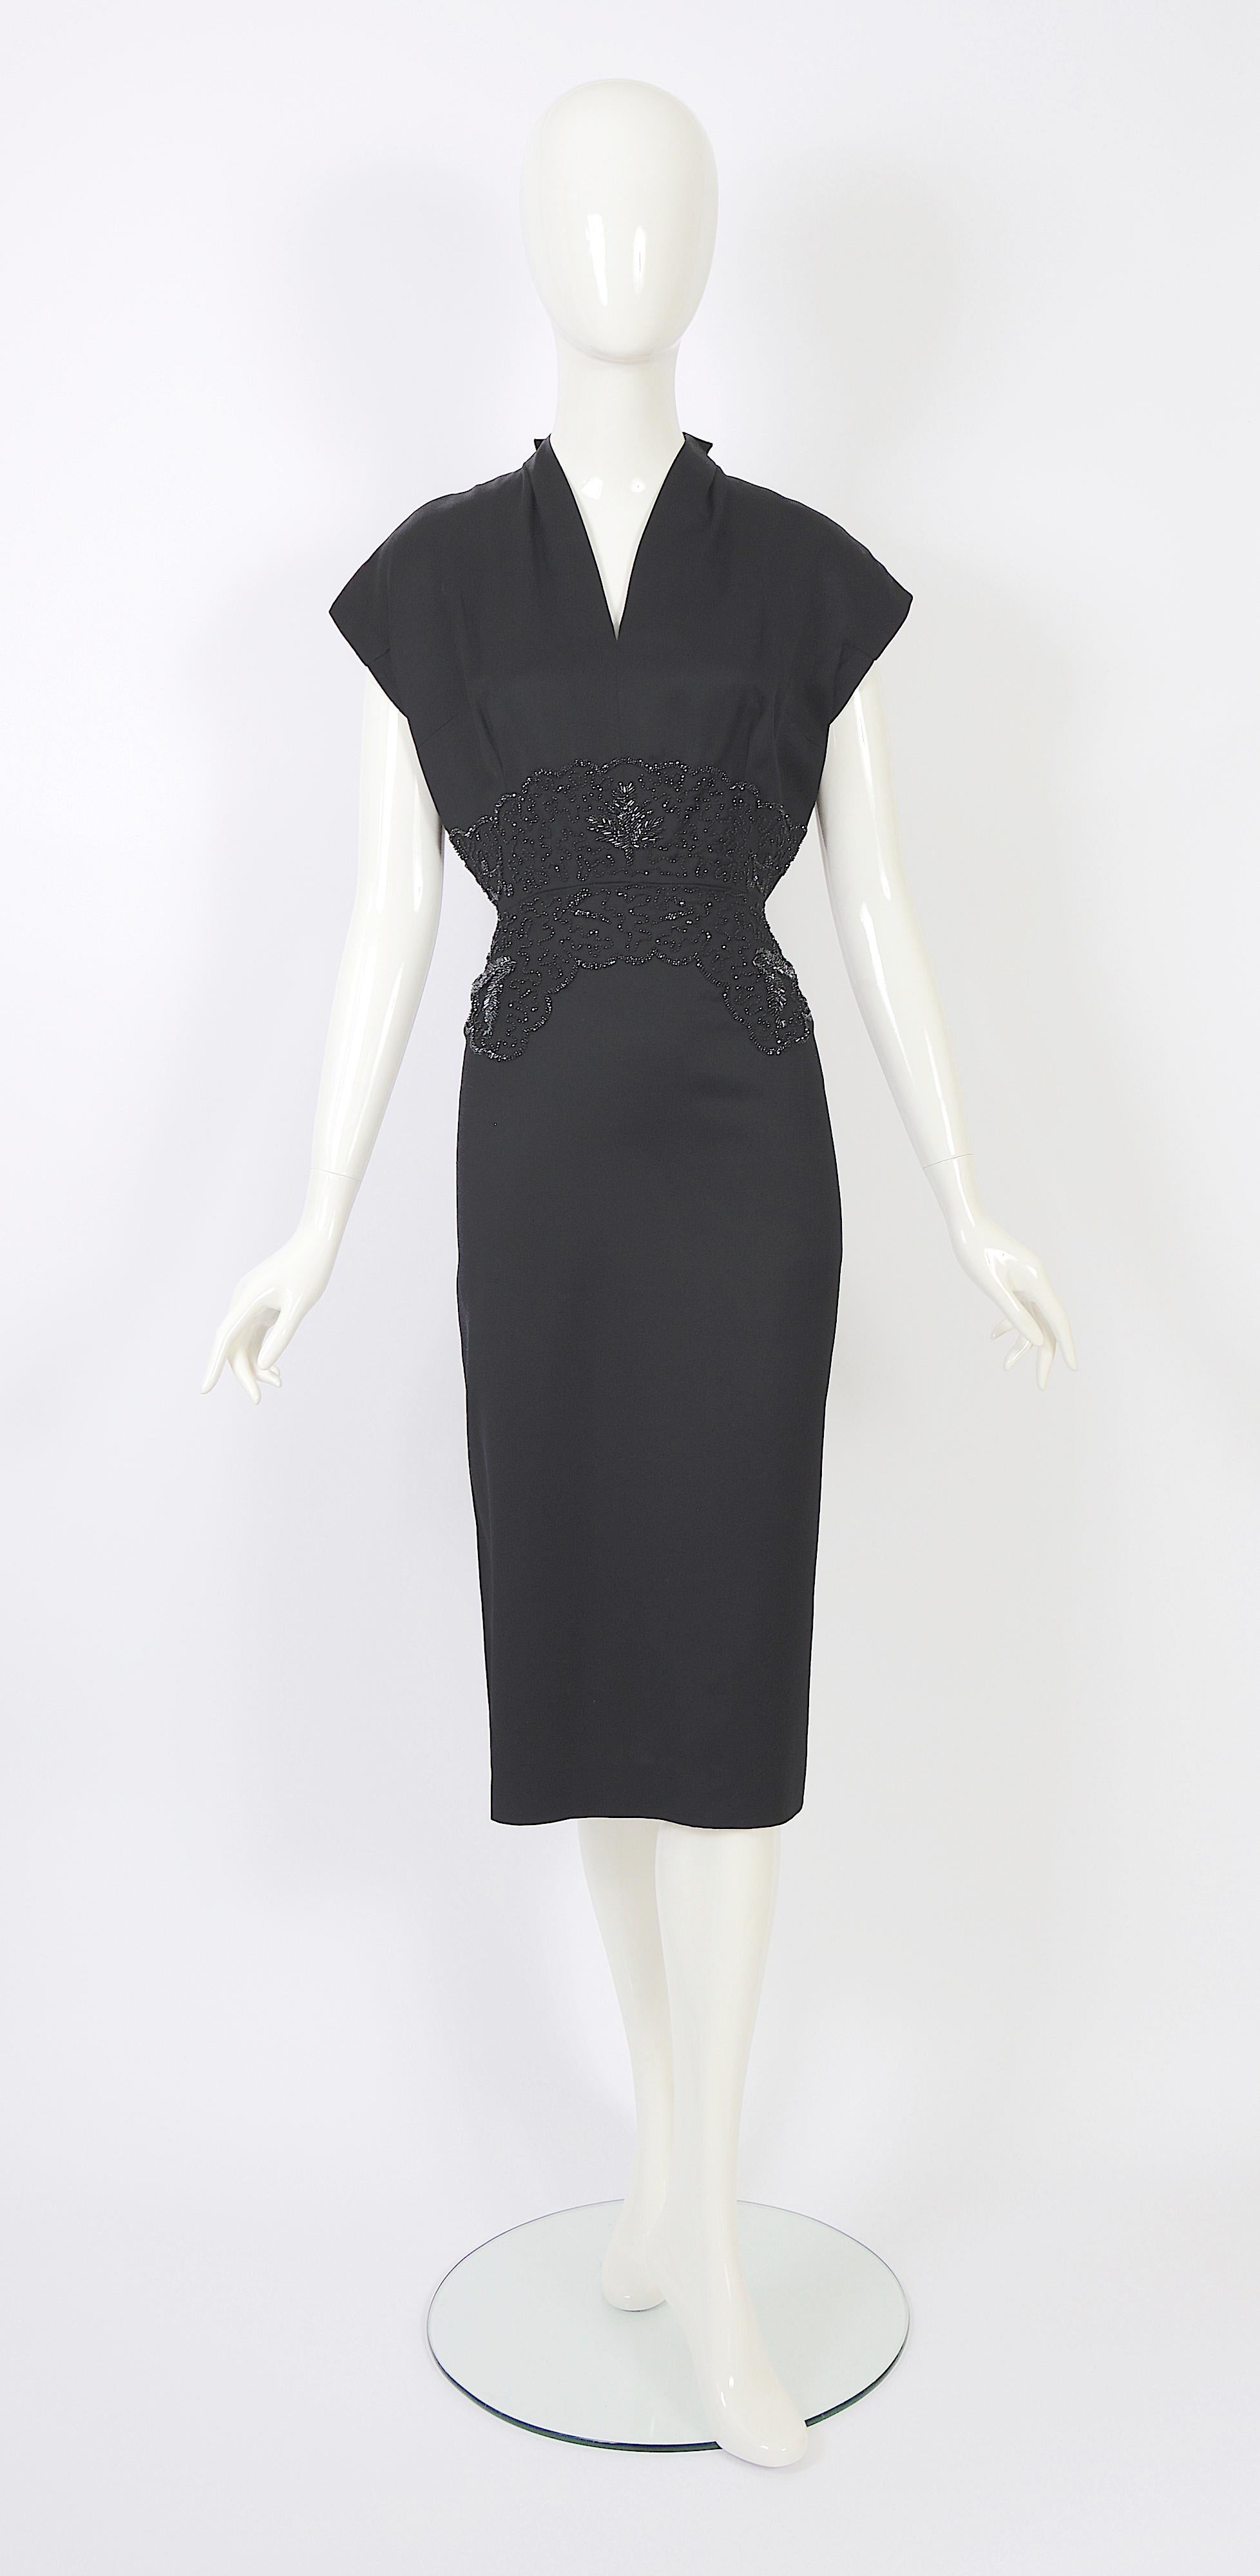 This beautiful 1950s Lancel haute couture dress has a beaded waist and is made in a luxurious wool. 
The dress doesn't have a lining, as it was common to wear a separate lingerie dress or suit in those days. 
It's hard to believe this dress dates